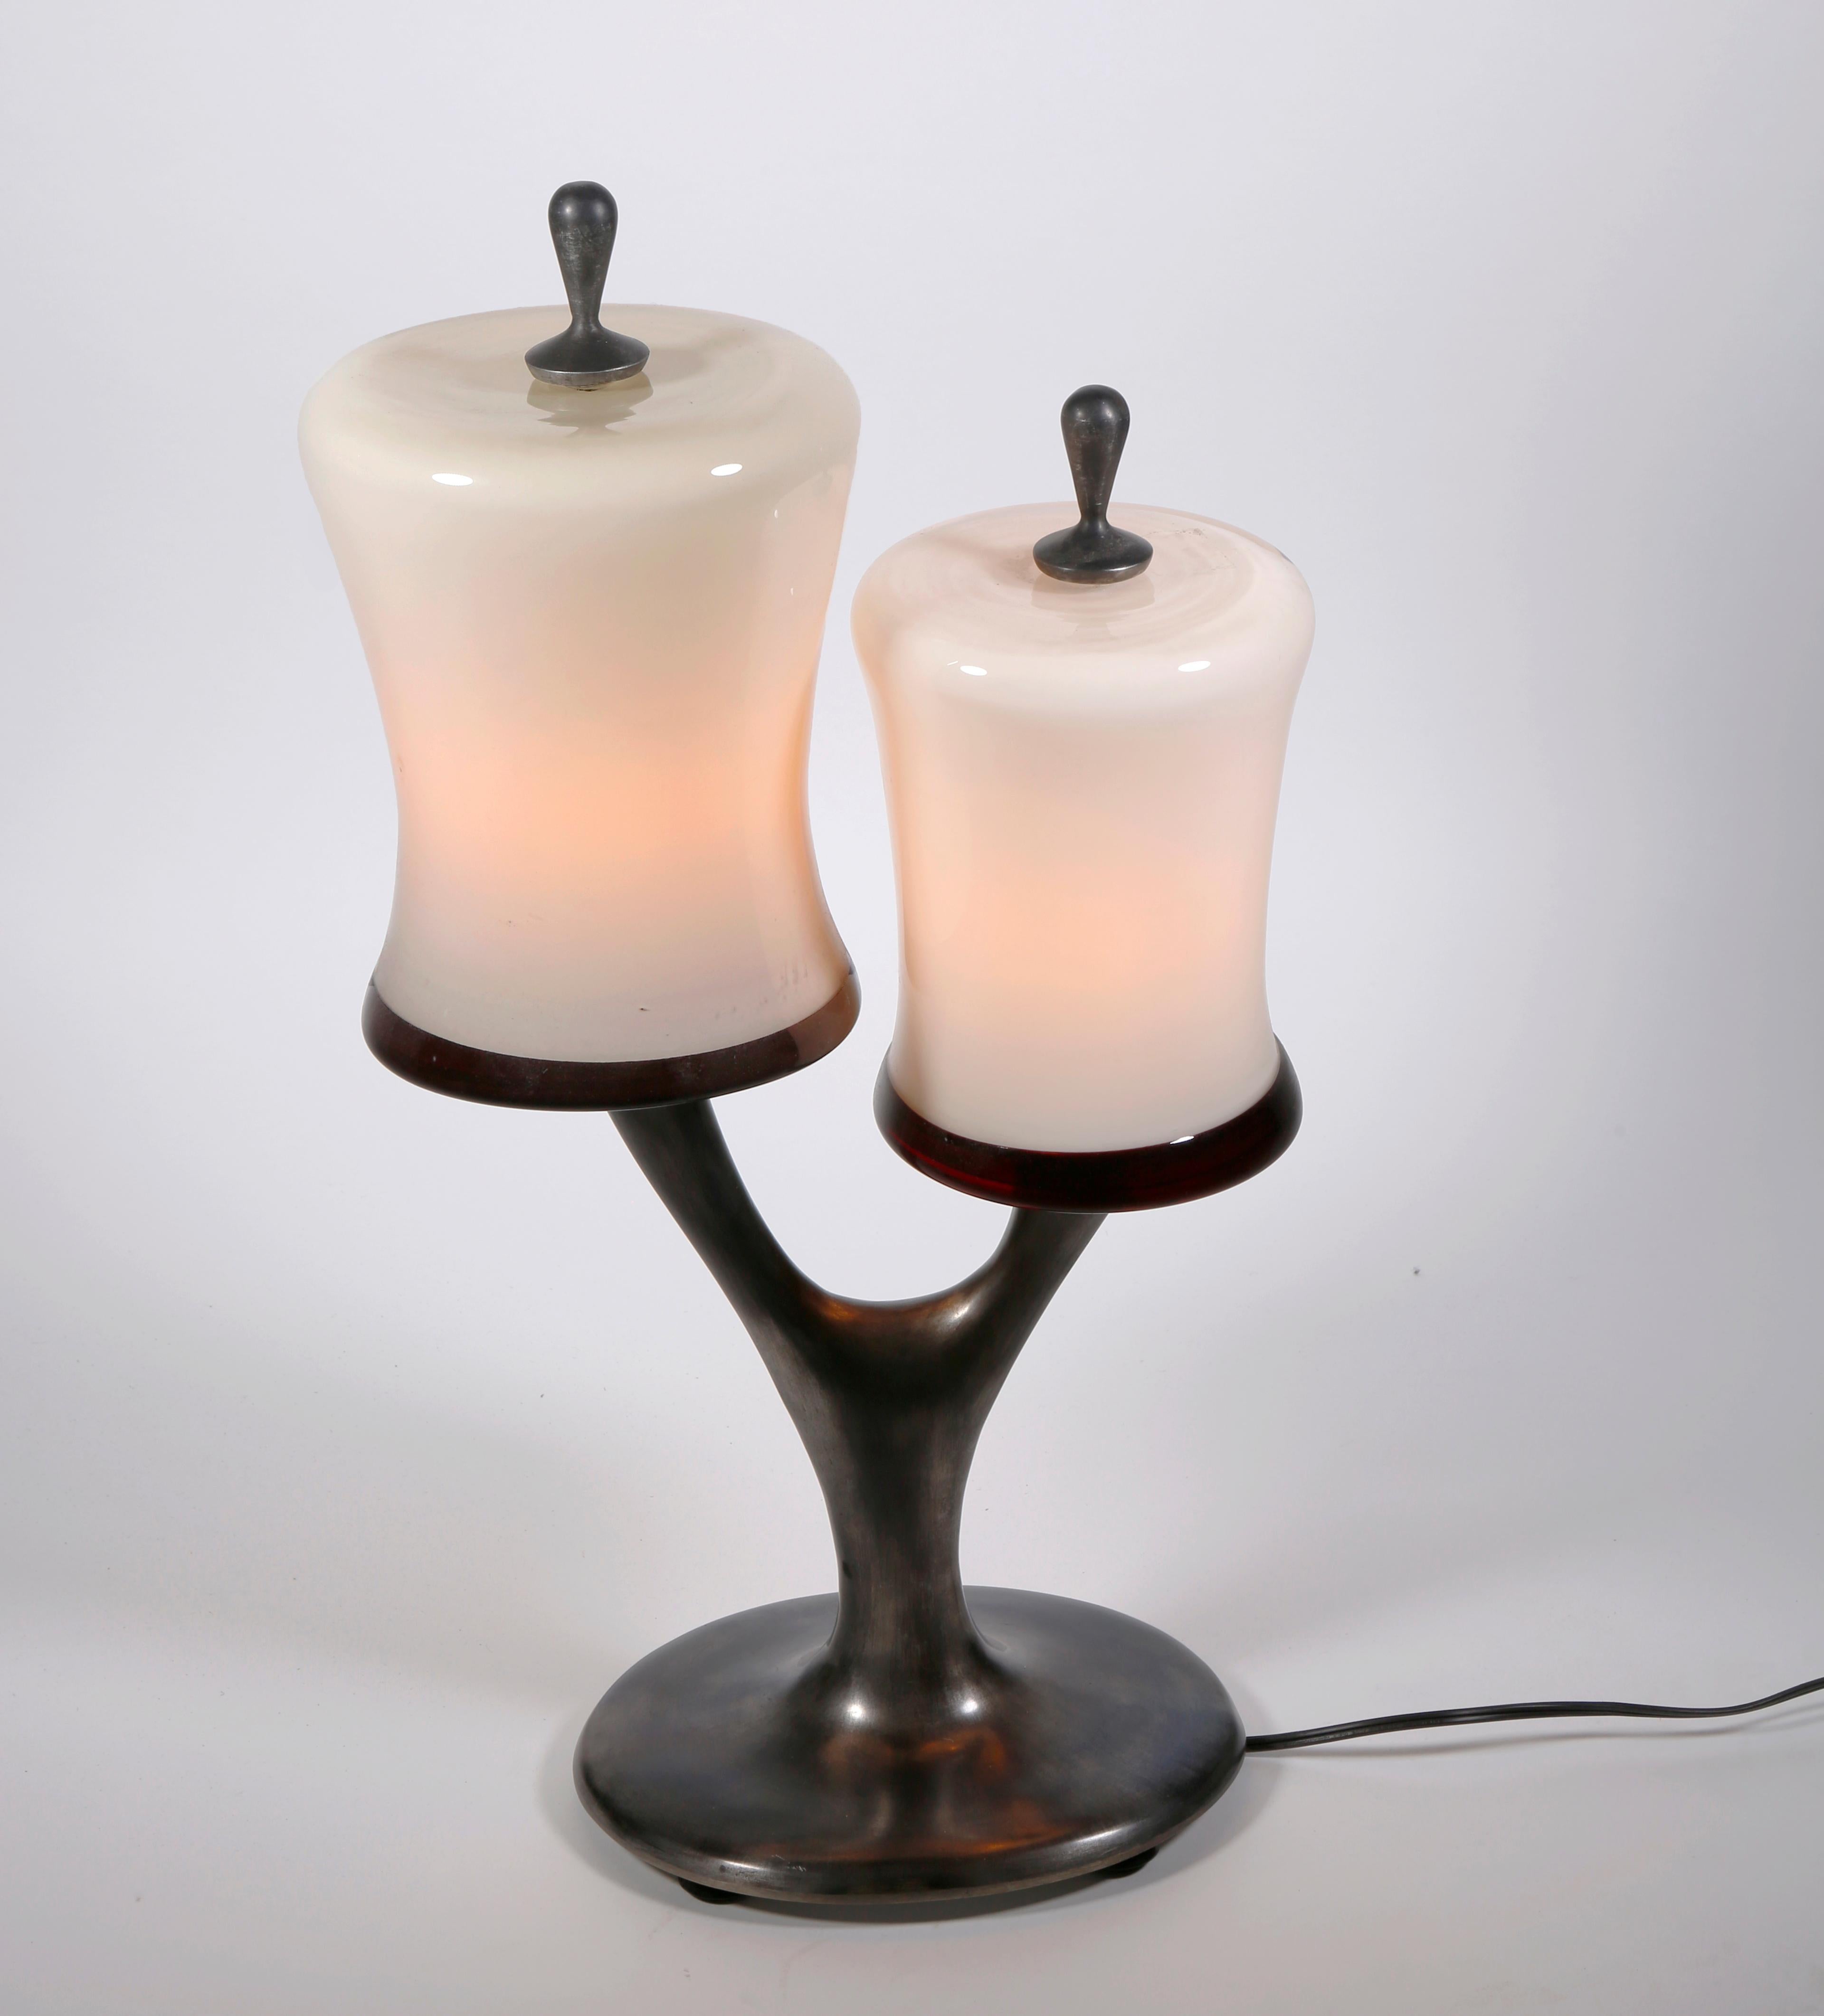 Twins Twig Table Lamp, Carved Cast Aluminum, Blown Glass, Jordan Mozer, USA, 1997 In Excellent Condition For Sale In Chicago, IL